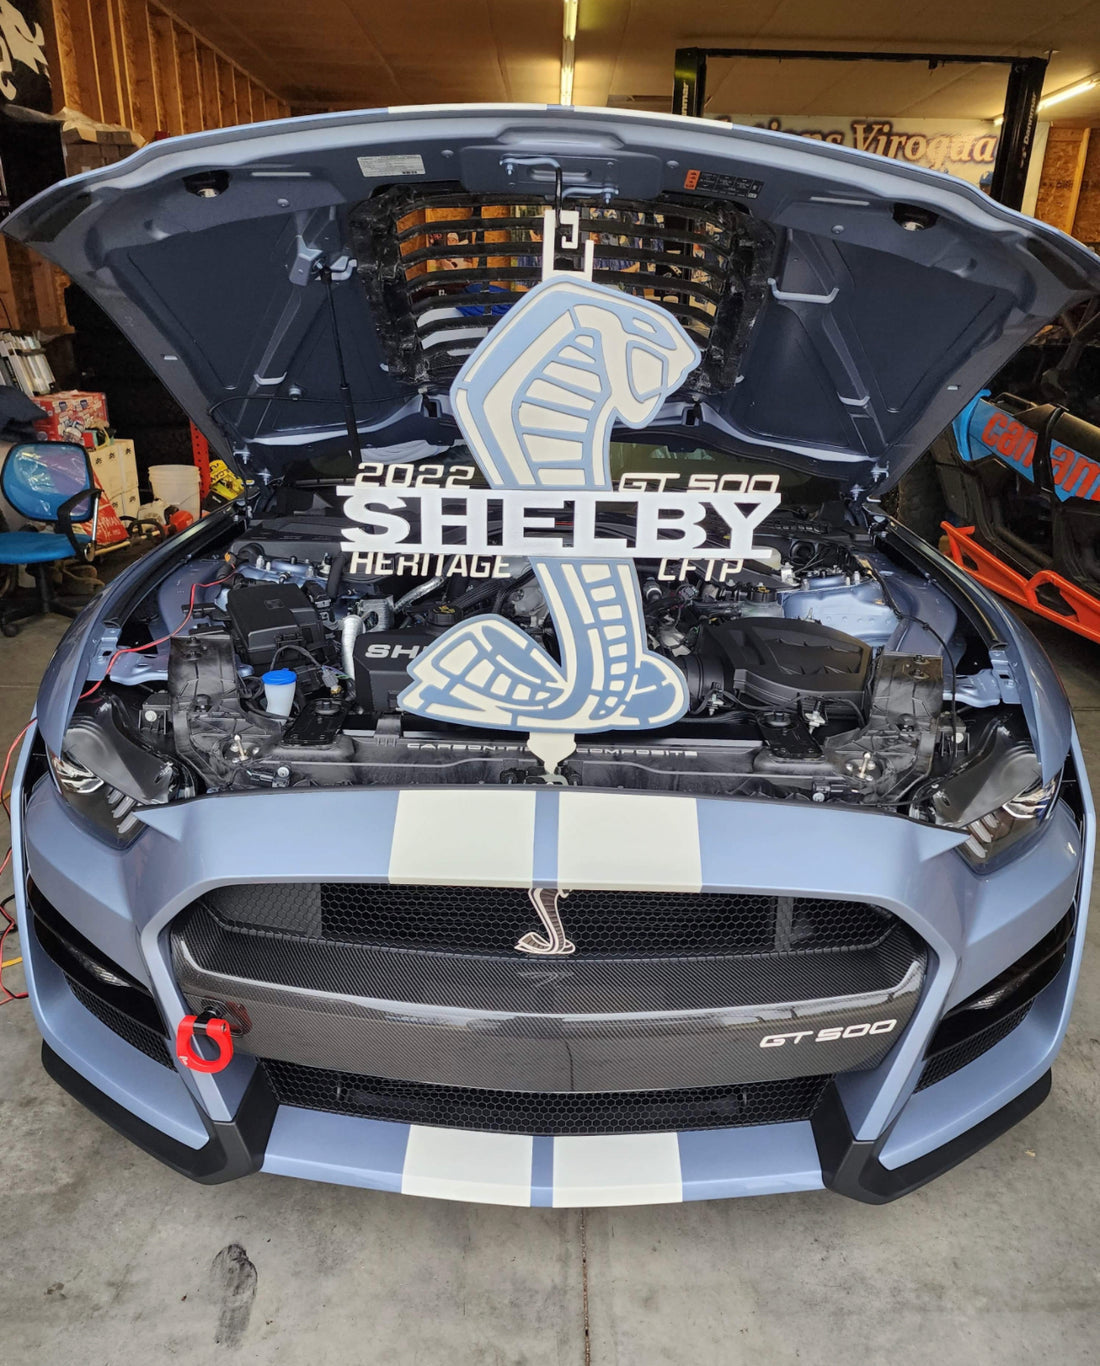 Shelby heritage edition gt500 hood prop, brittany blue